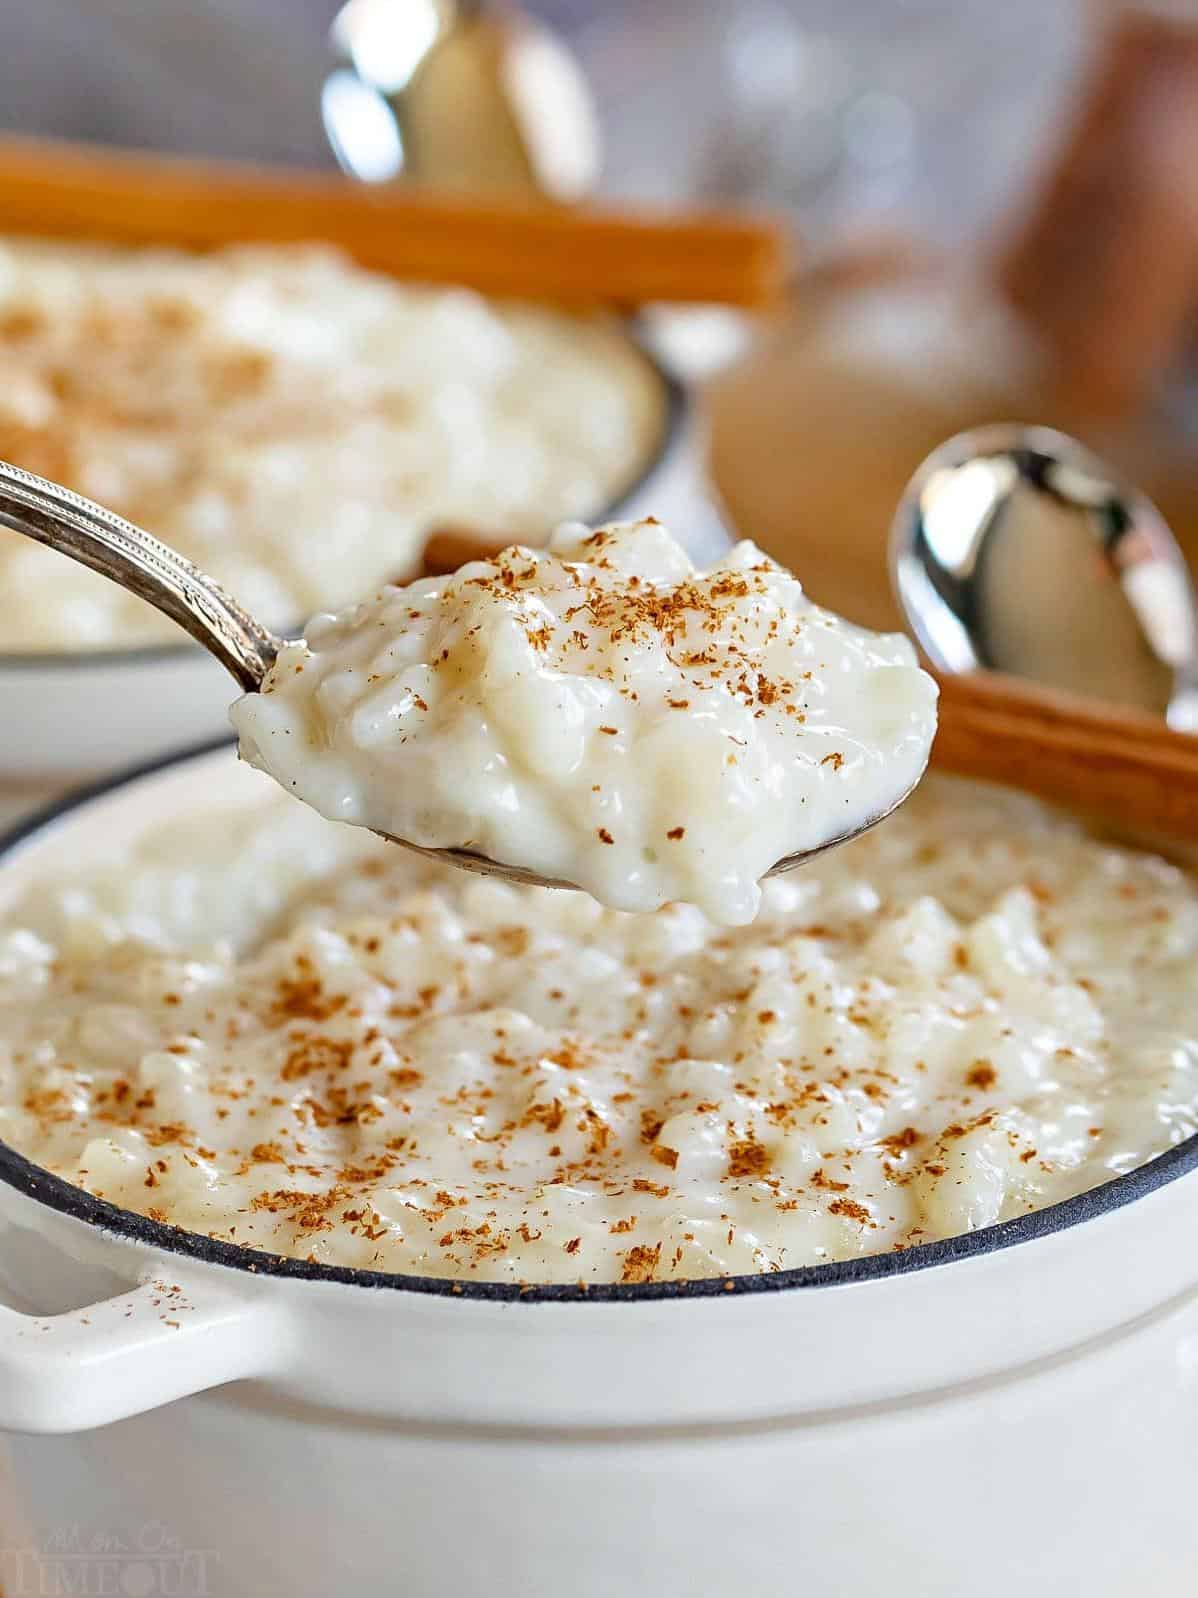  Creamy and dreamy, you won't be able to resist this rice pudding.